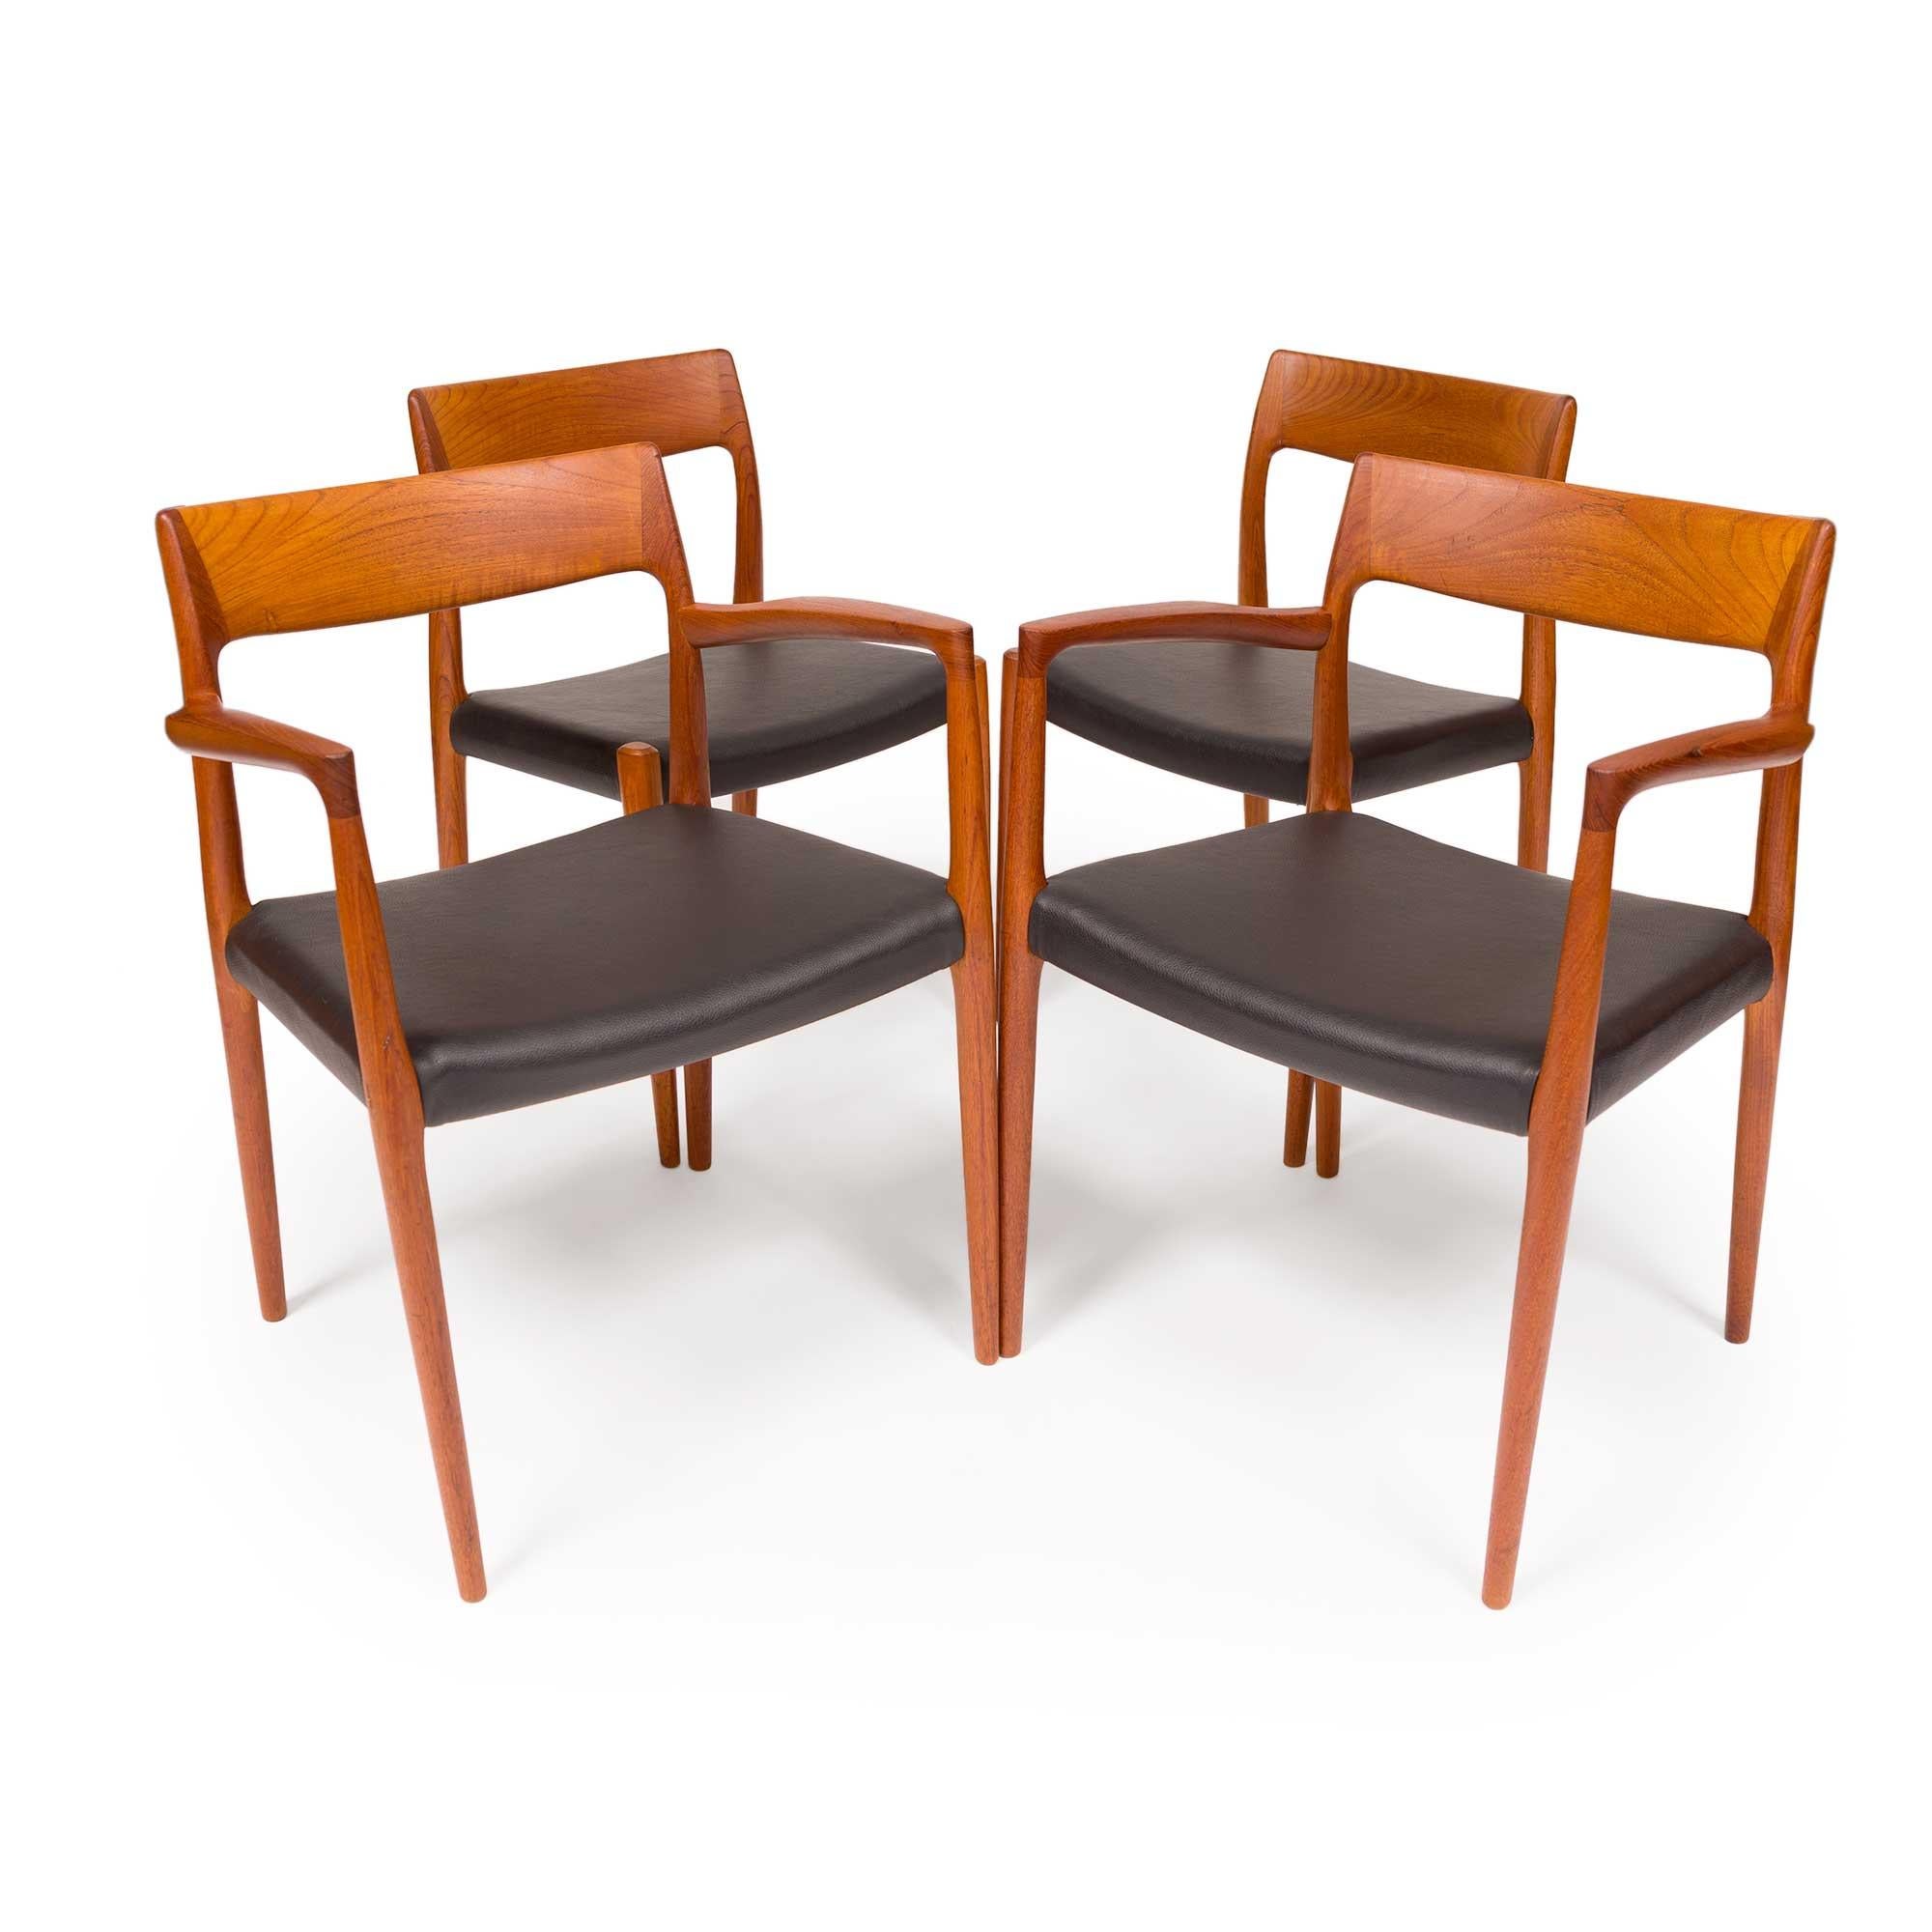 Niels Otto Møller, a distinguished Danish furniture designer and founder of J.L. Møllers Møbelfabrik, left an indelible mark on mid-century modern design. Renowned for his beautifully crafted wooden chairs, Møller's creations epitomized clean lines,